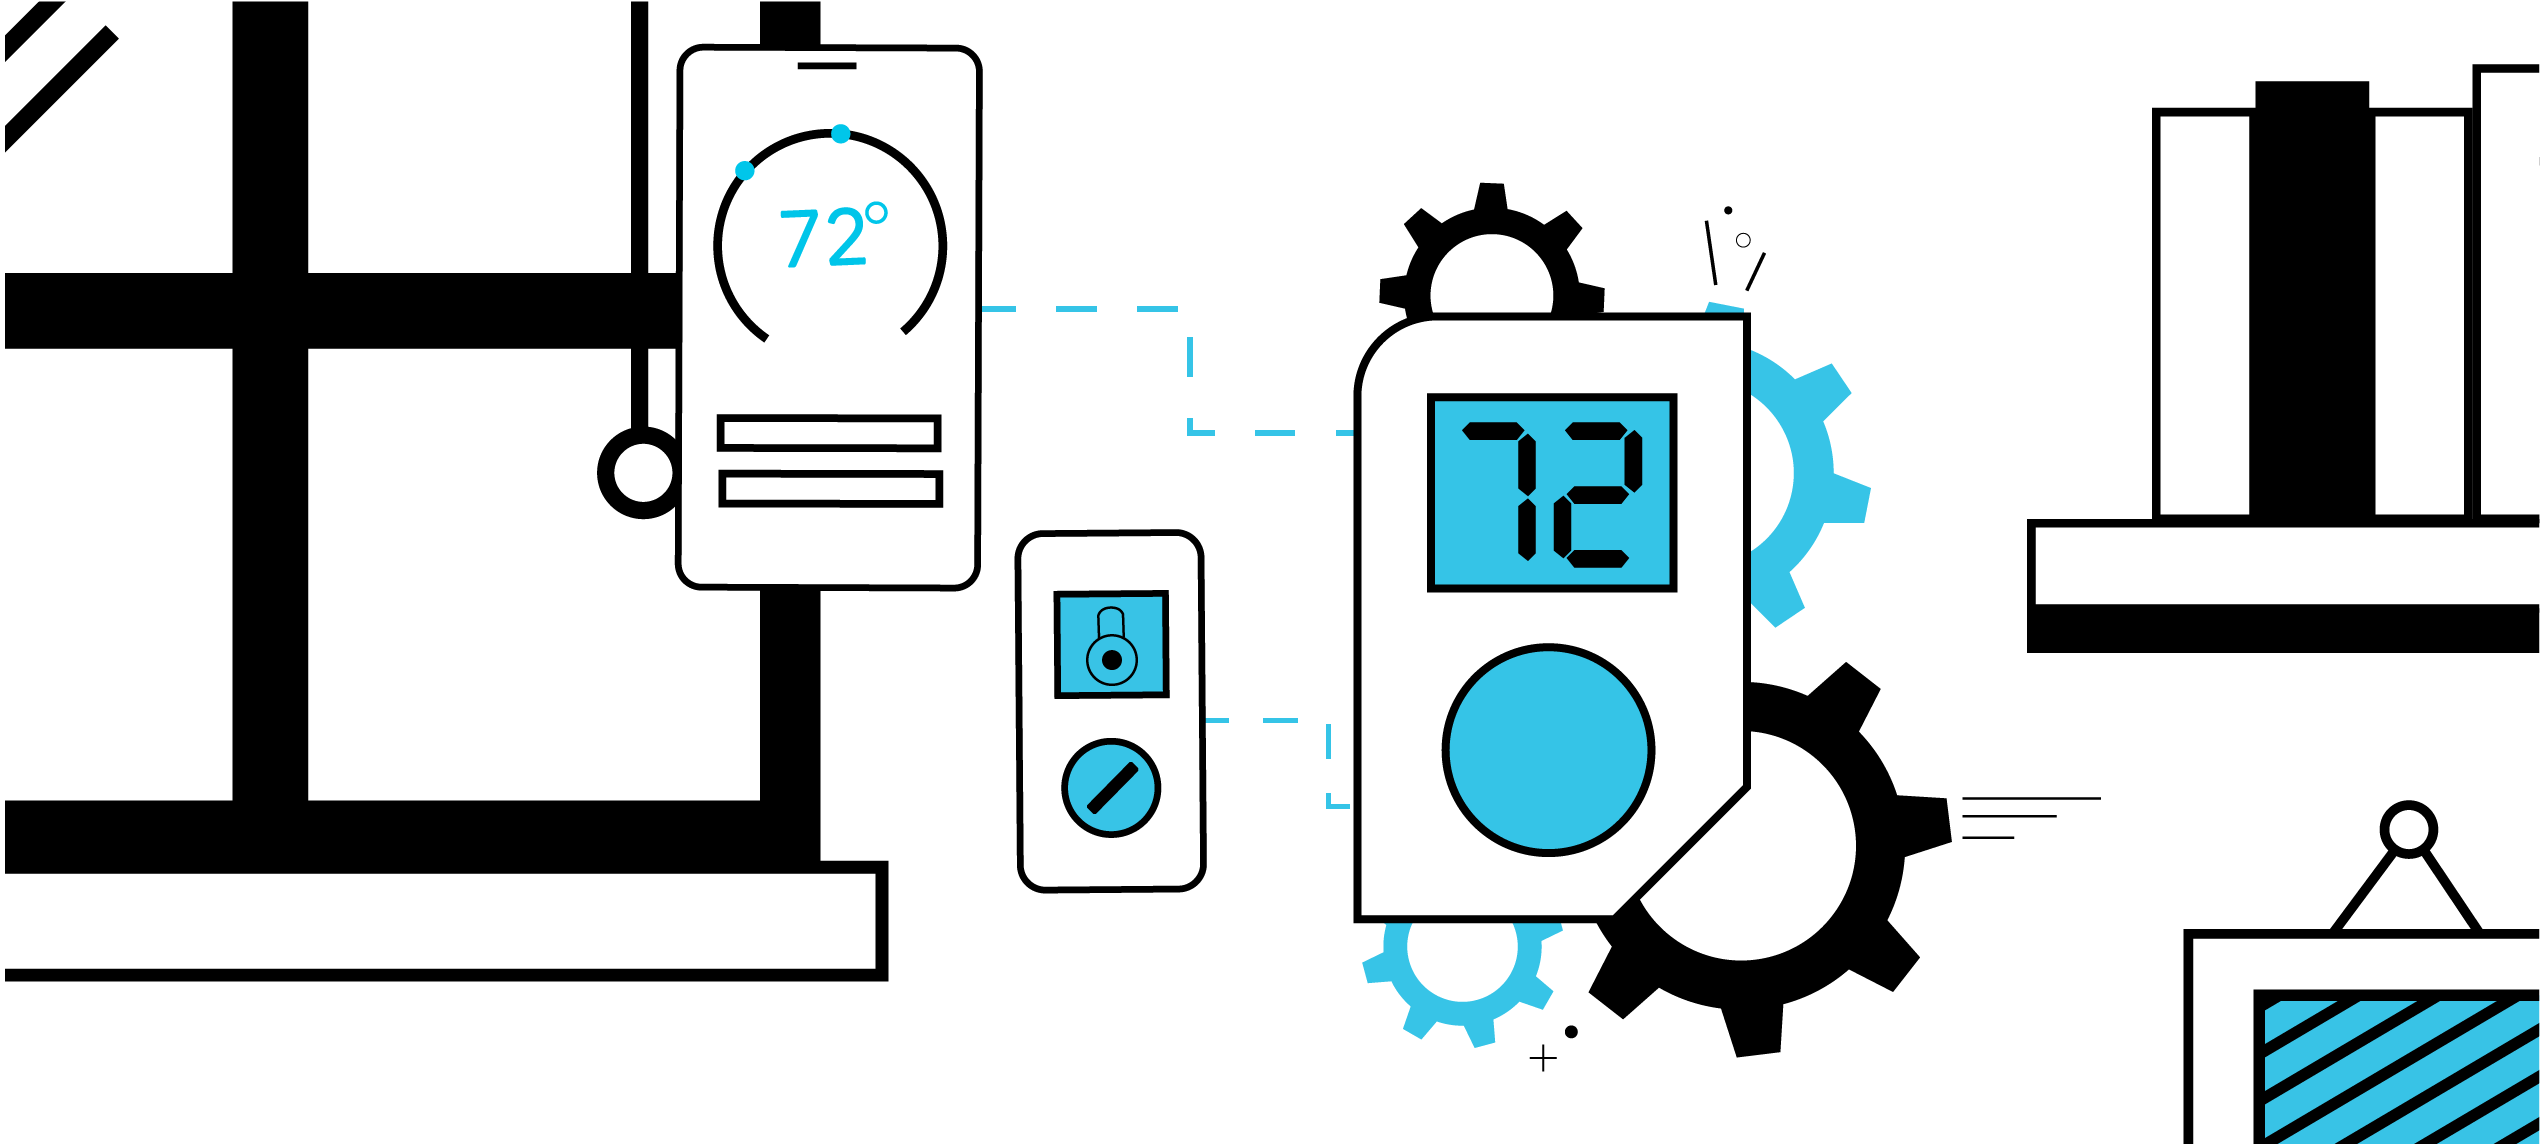 An illustration showing the connection between a smart thermostat, smart phone, and a smart lock.